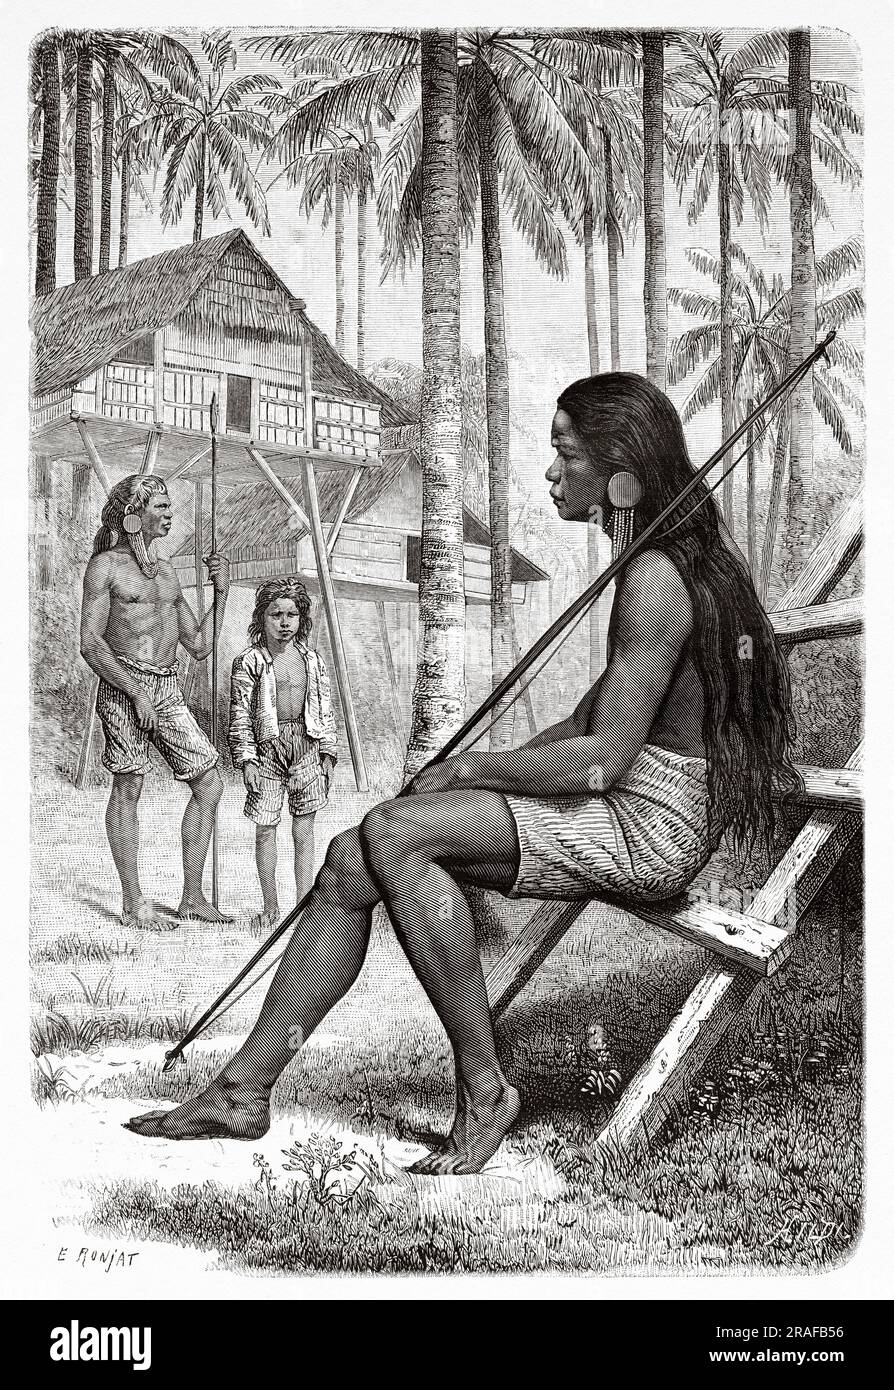 Guianga warrior, Mindanao, Philippines island. Indonesia. Journey to the Philippines and Malaysia by Dr. J. Montano 1879-1881. Old 19th century engraving from Le Tour du Monde 1906 Stock Photo